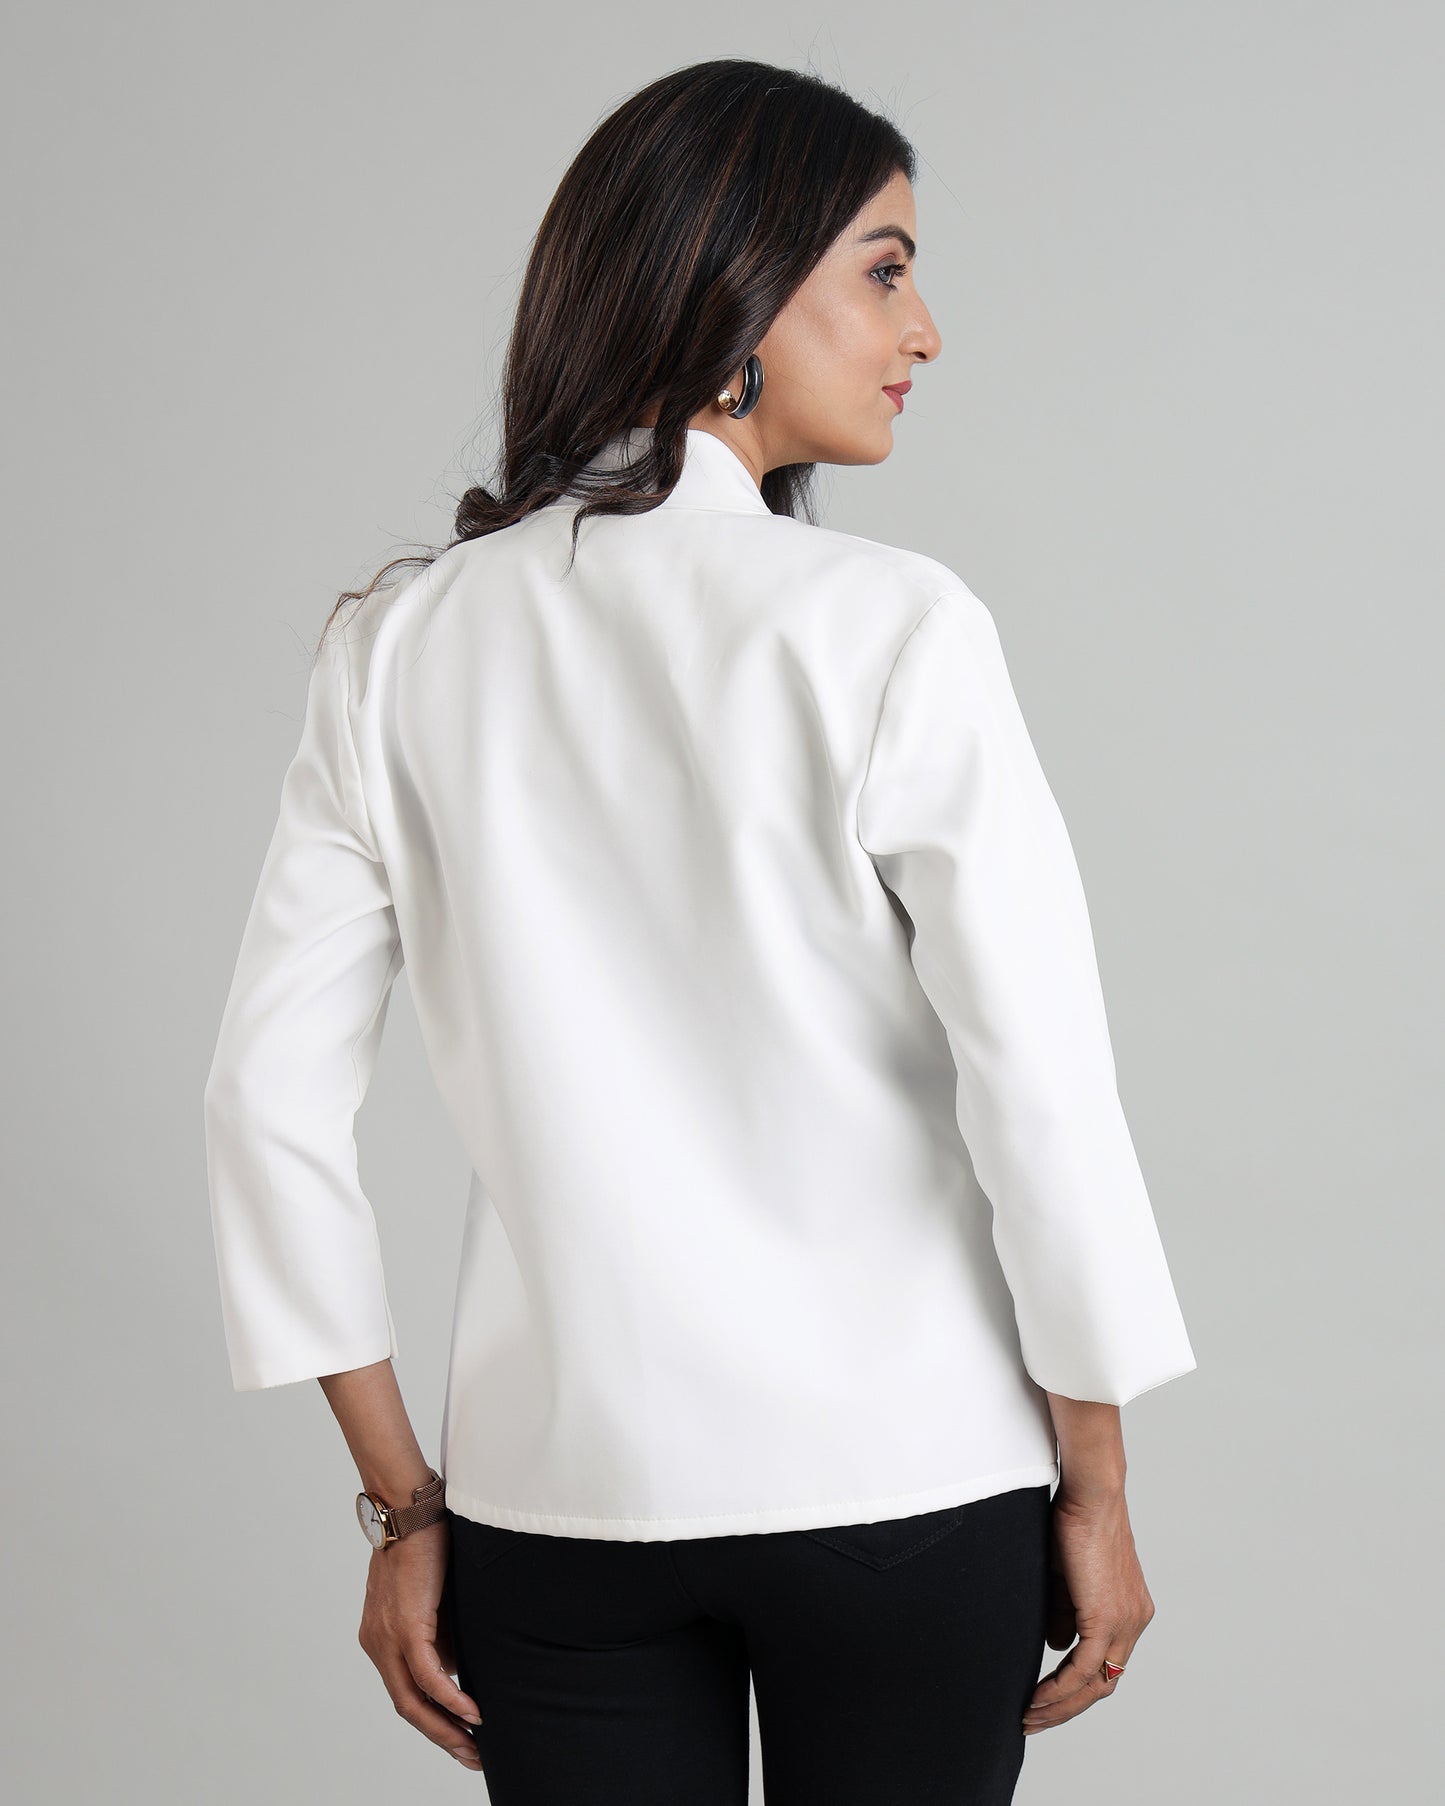 The White Edit: A Jacket for Every Season